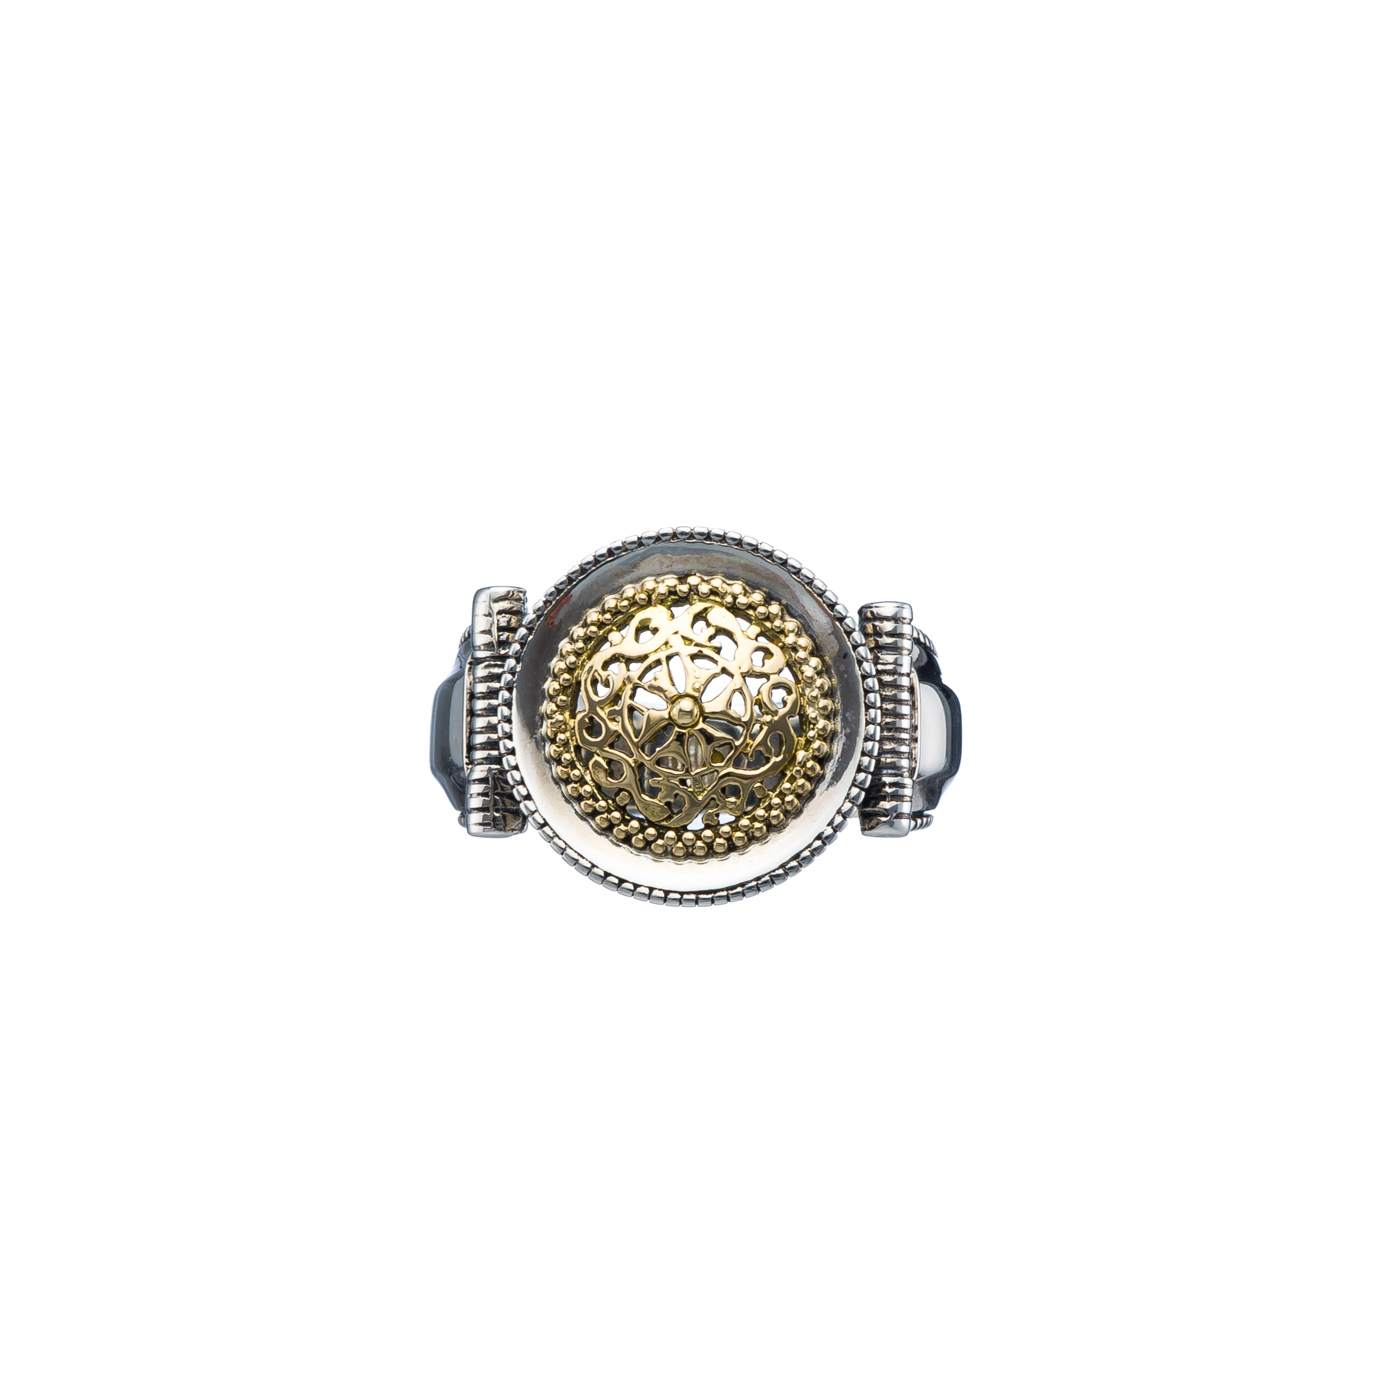 Classic round ring in 18K Gold and Sterling Silver